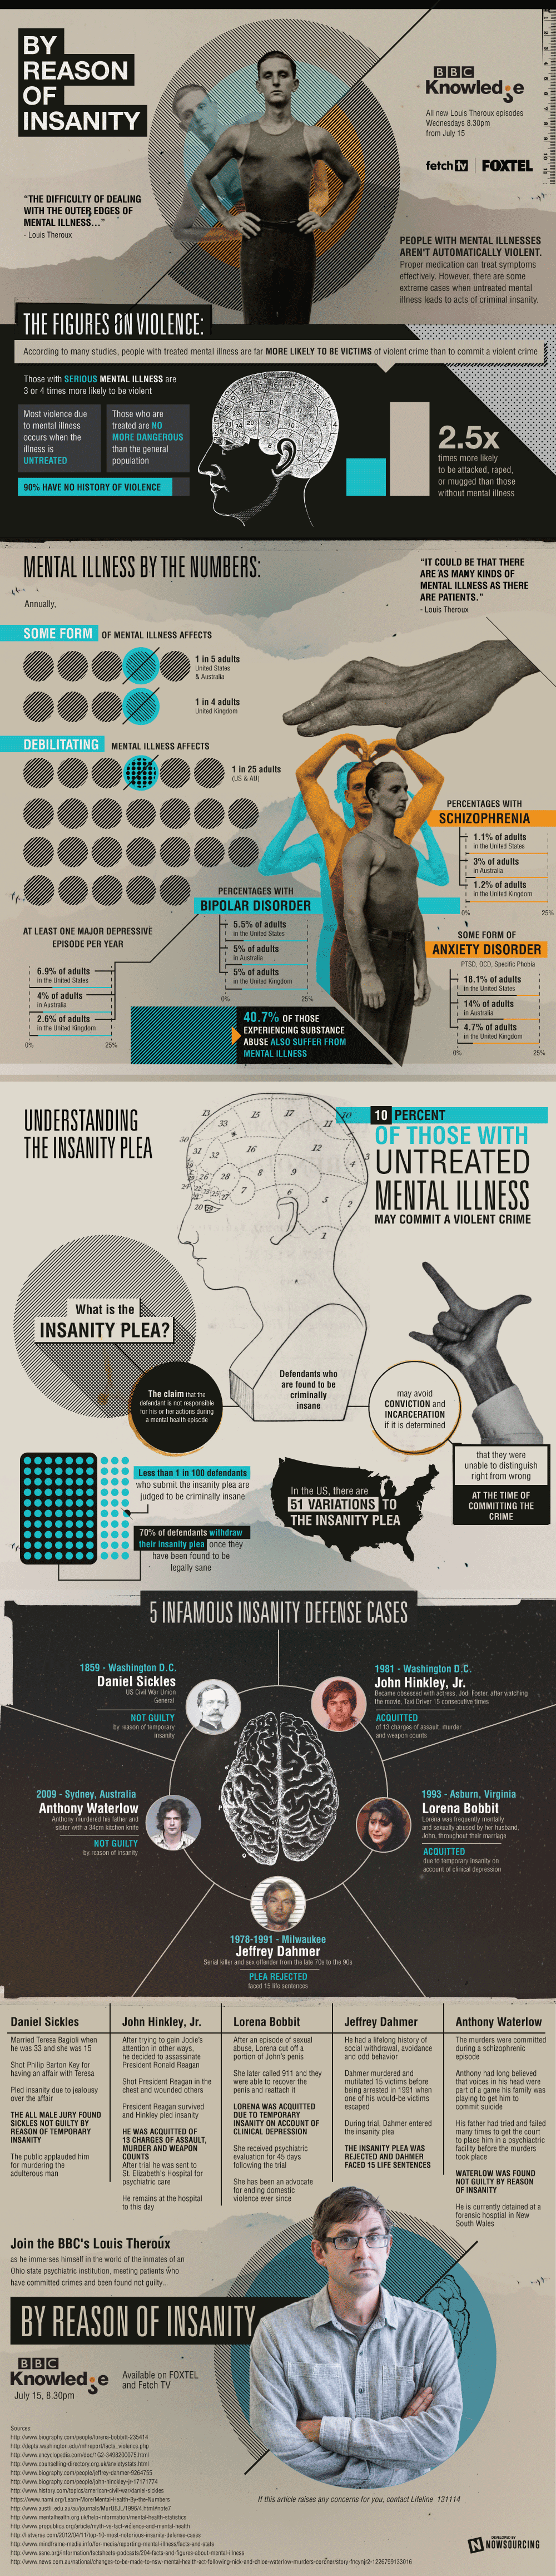 By reason of insanity [infographic]